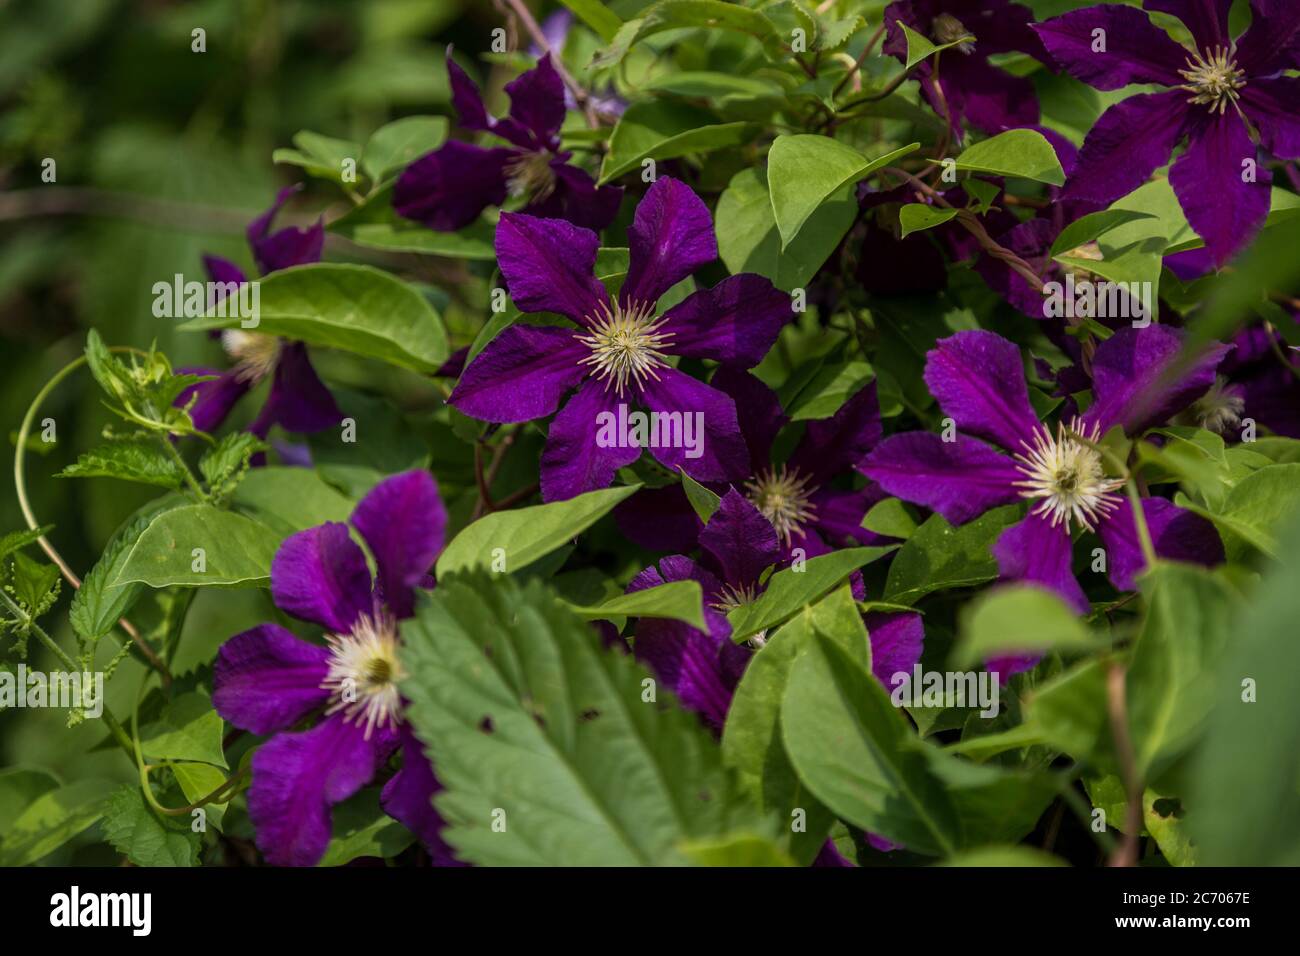 Climbing plant Clematis lanuginosa is able to climb the wire up to 2m in height Stock Photo